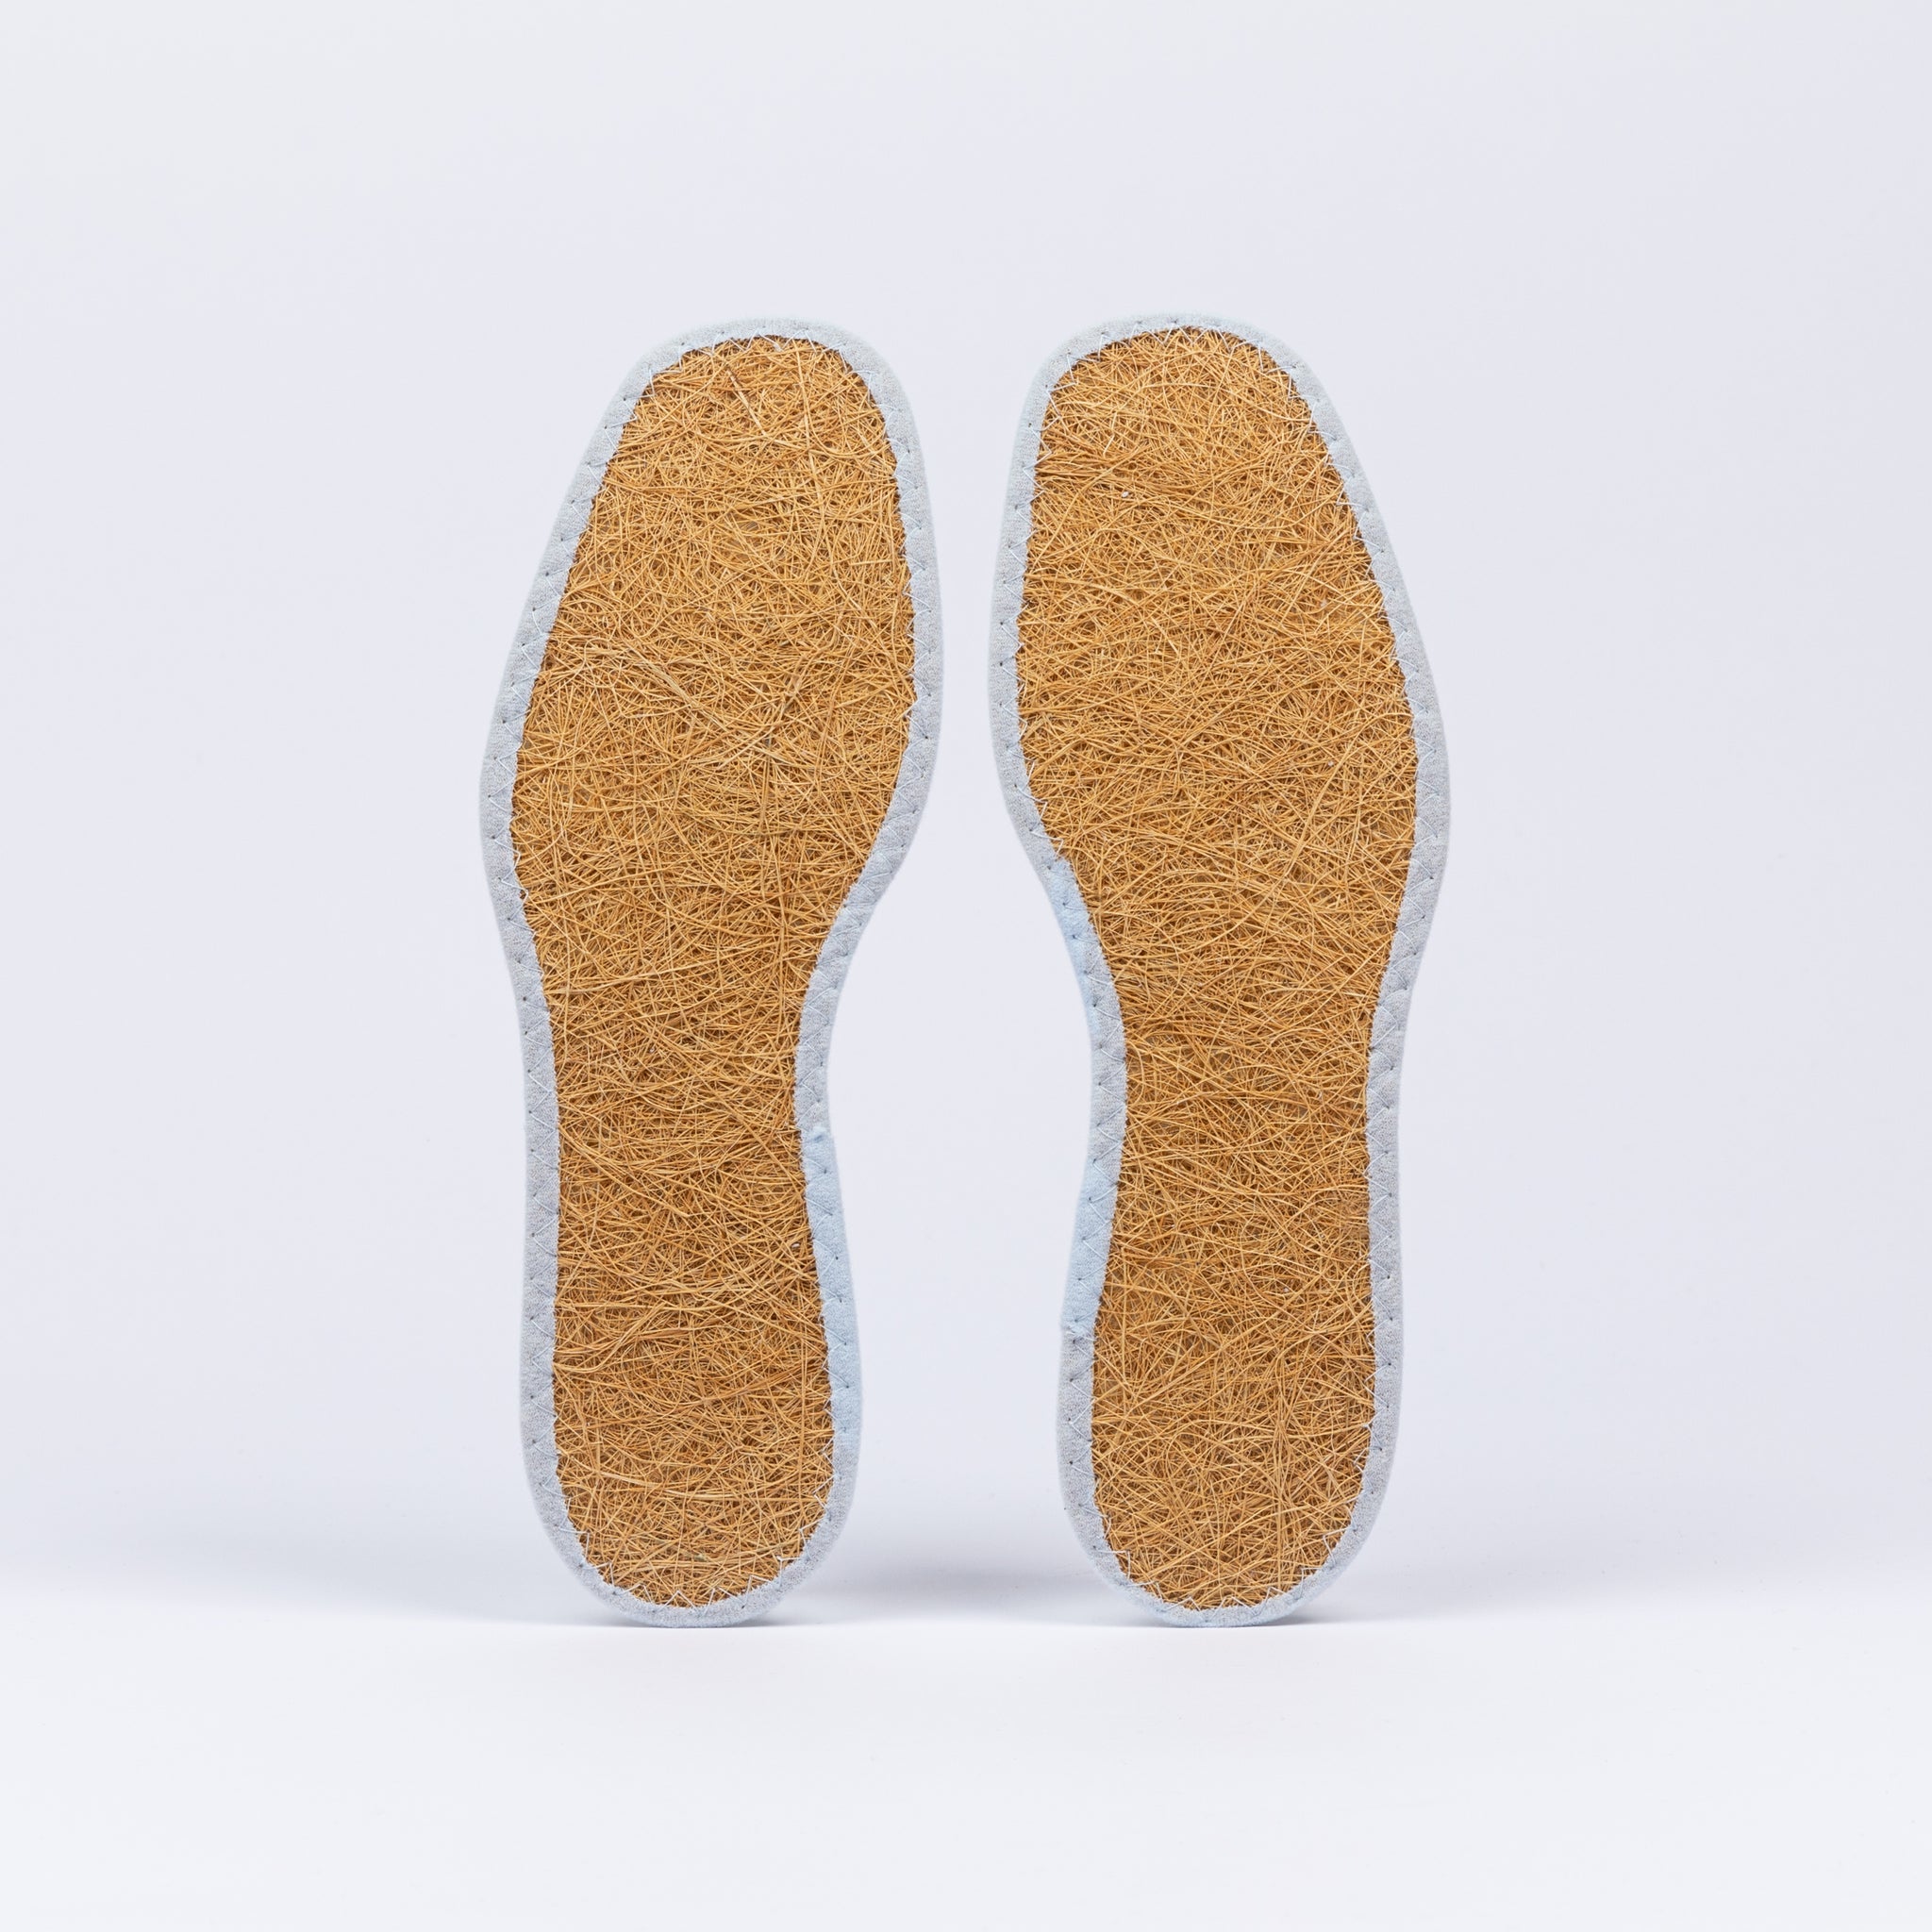 SNEAKERS ER ODER FRESH SOCKLESS INSOLES - Sneakers ER